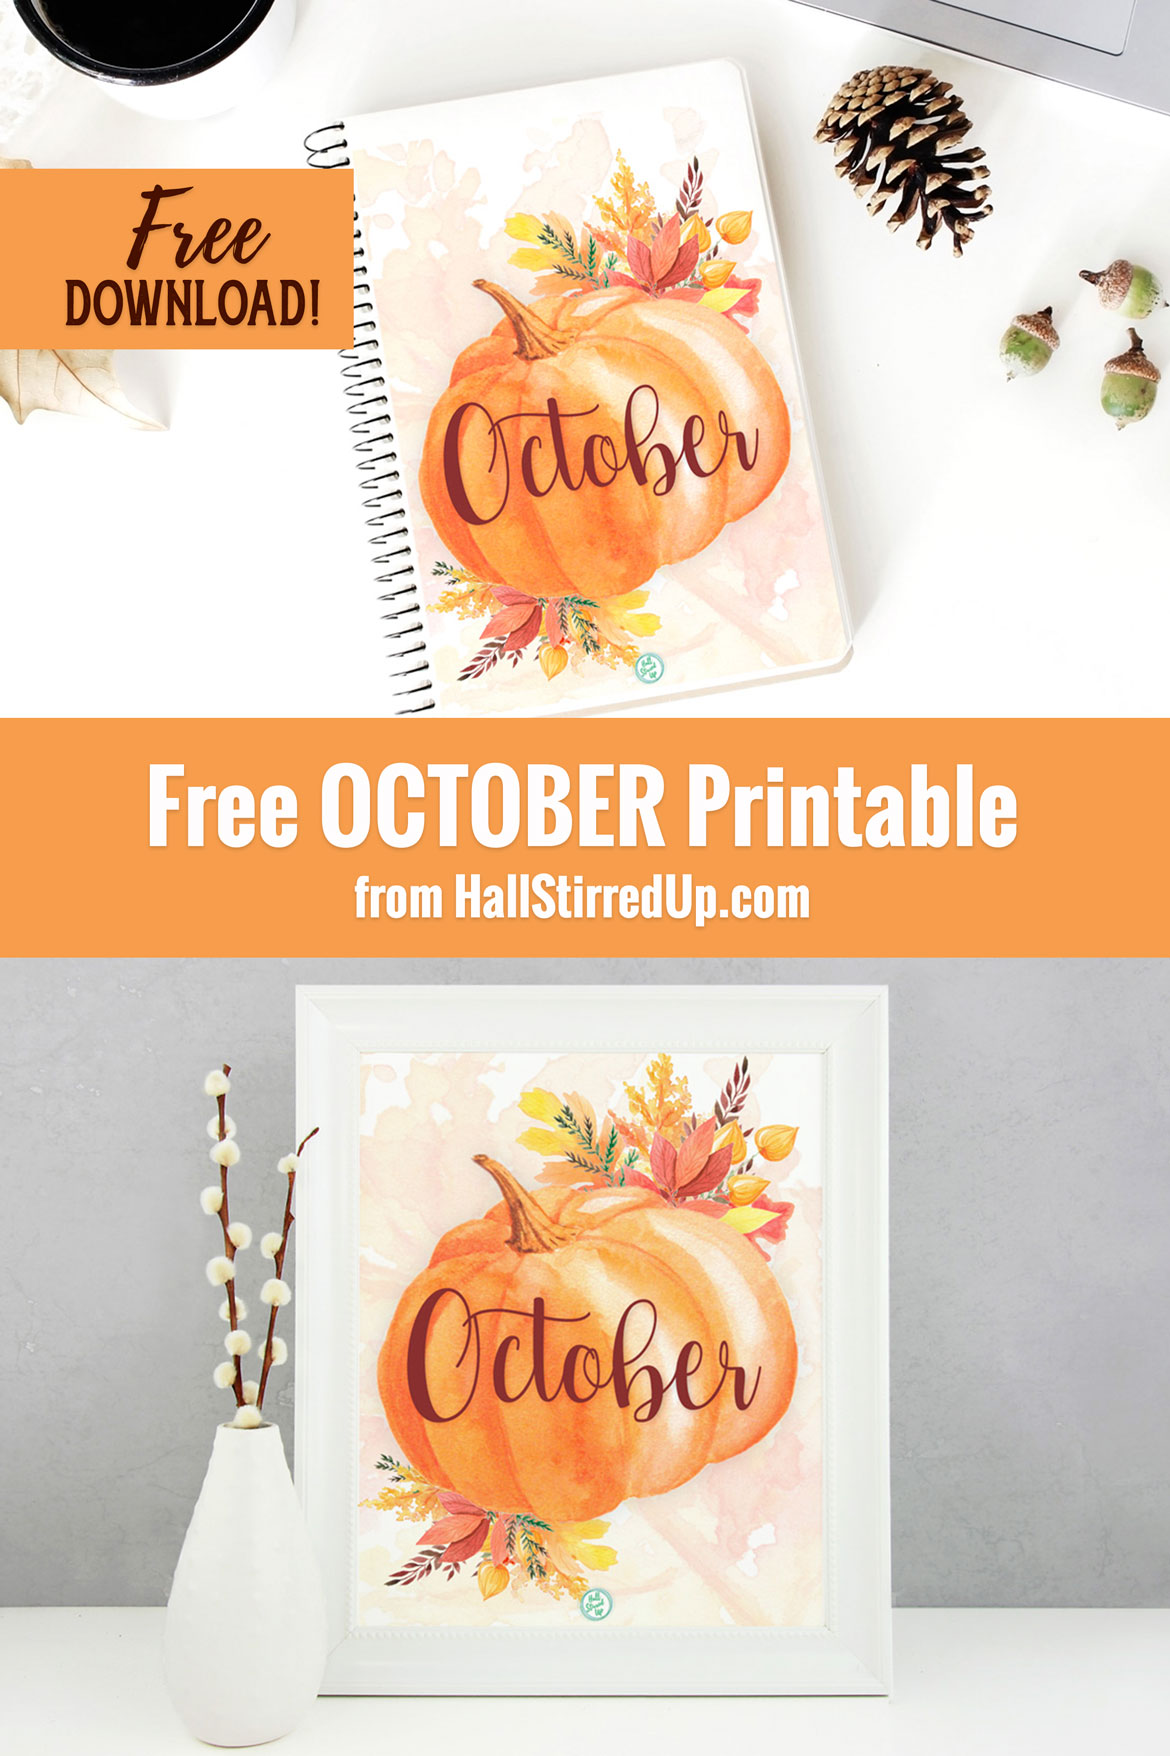 Greet October with a free pumpkin printable